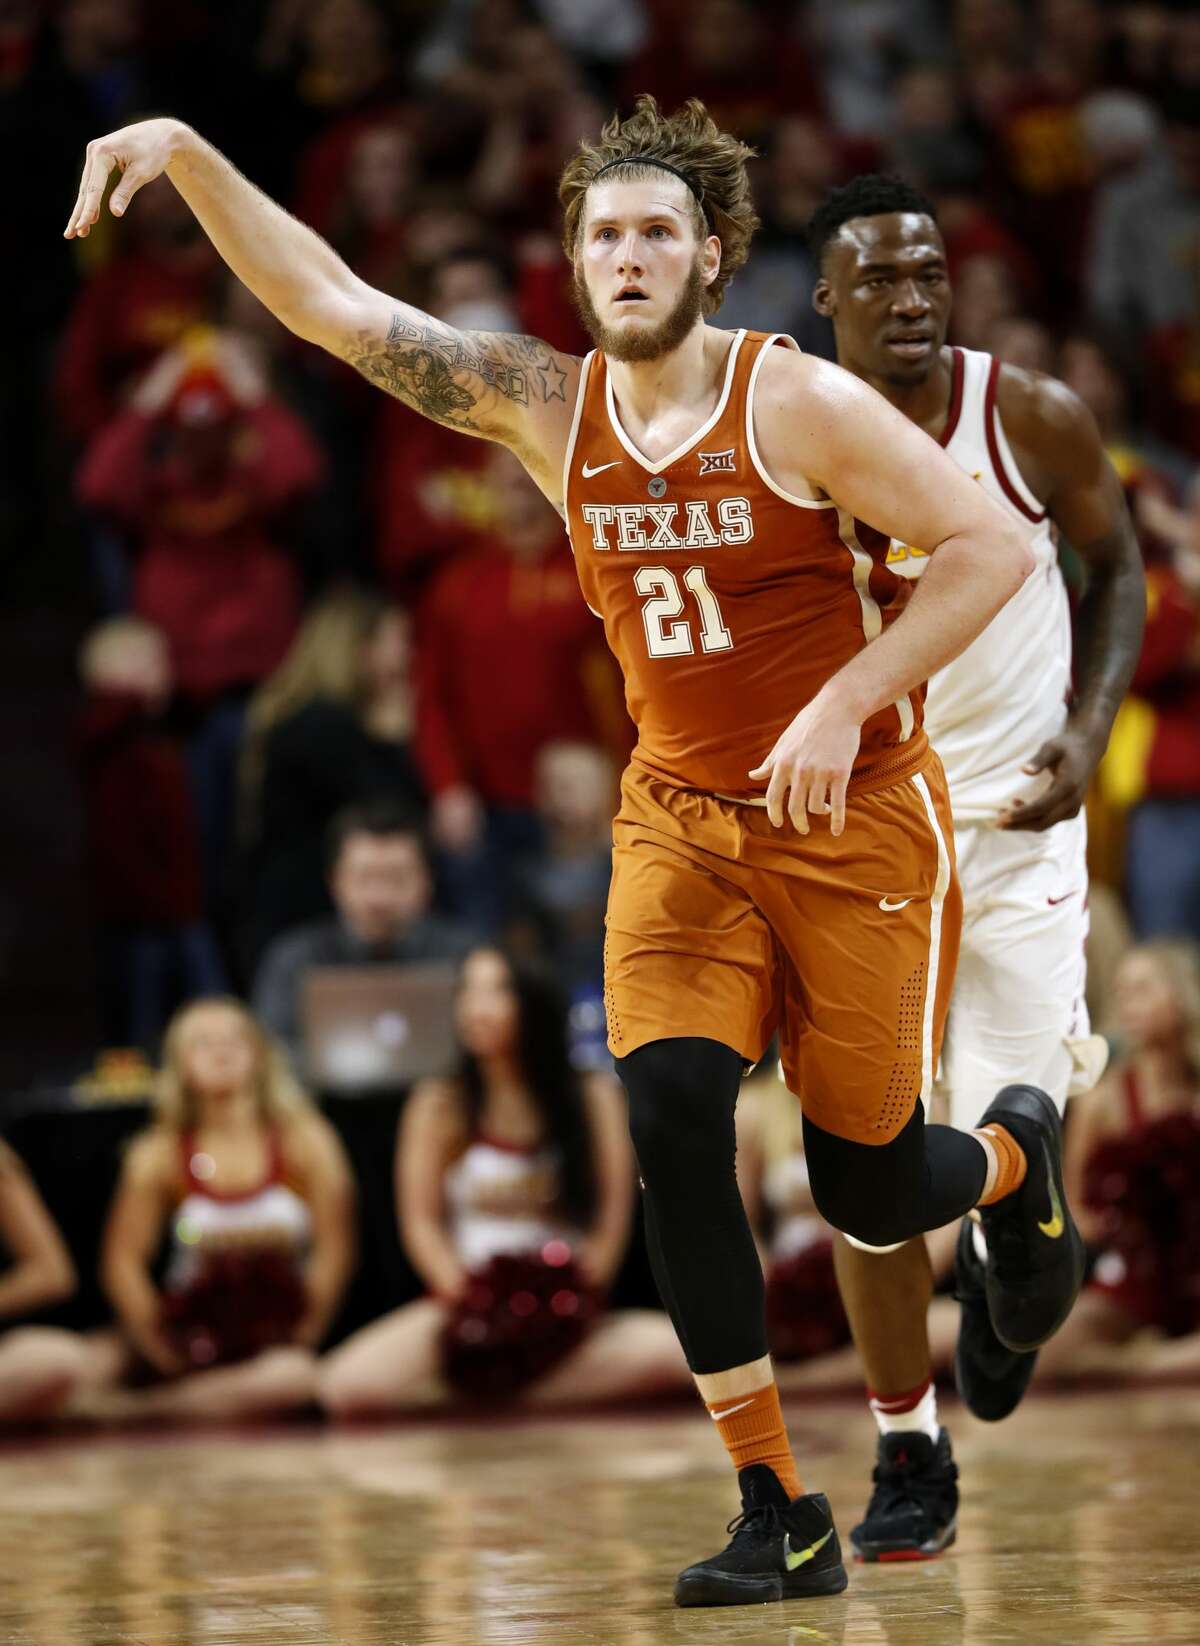 Texas forward Dylan Osetkowski (21) celebrates in front of Iowa State forward Cameron Lard, right, after making 3-point basket at the end of an NCAA college basketball game, Monday, Jan. 1, 2018, in Ames, Iowa. Osetkowski scored 25 points as Texas won 74-70 in overtime. (AP Photo/Charlie Neibergall)